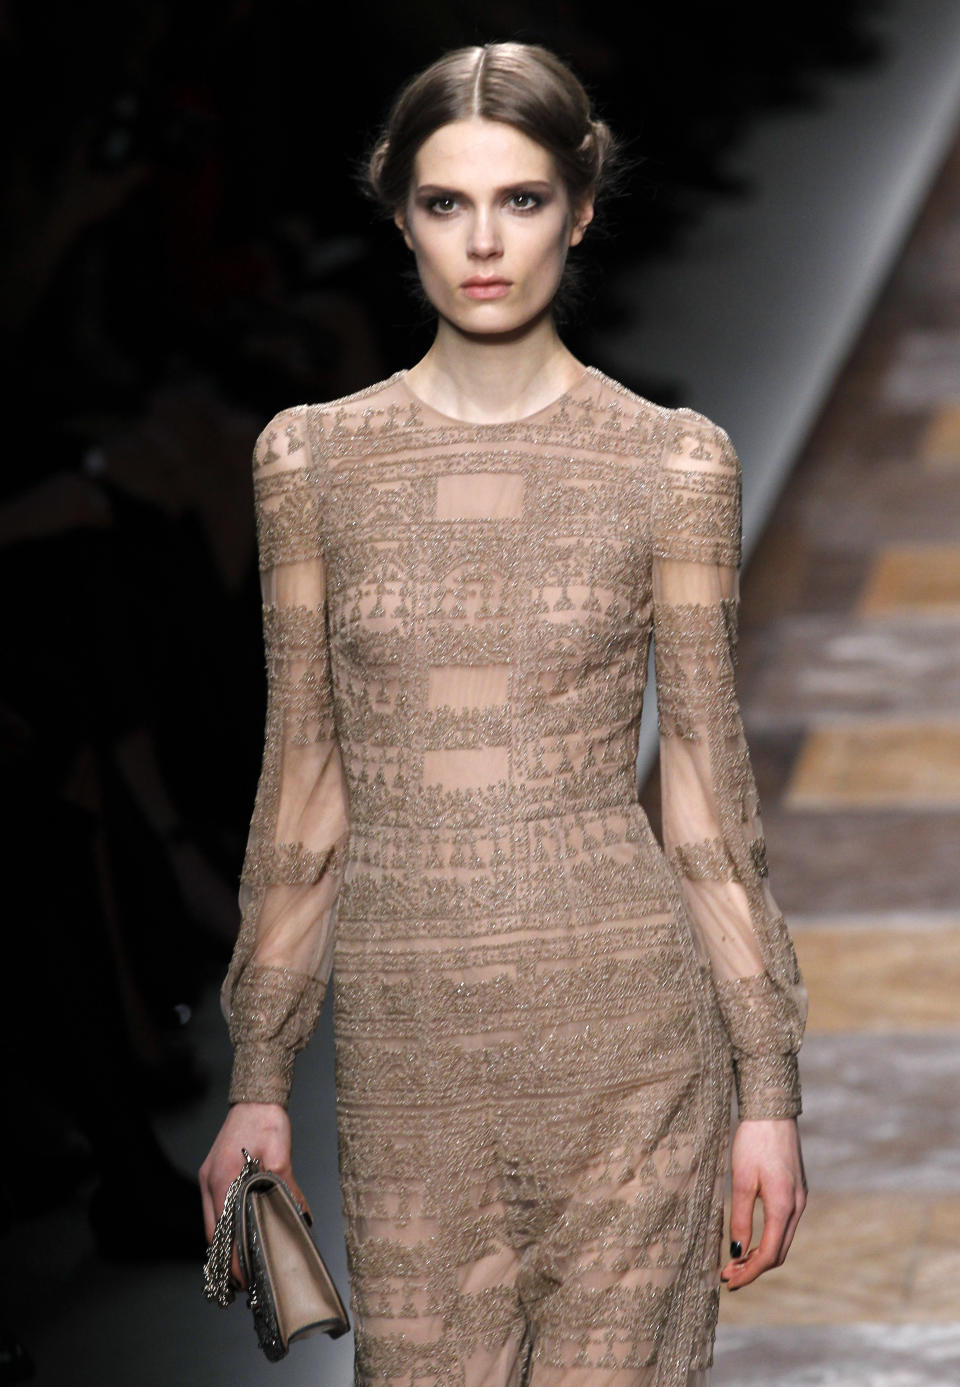 A model wears a creation by Maria Grazia Chiuri and Pier Paolo Piccioli for Valentino as part of the Fall-Winter, ready-to-wear 2013 fashion collection, during Paris Fashion week, Tuesday, March. 6, 2012. (AP Photo/Christophe Ena)